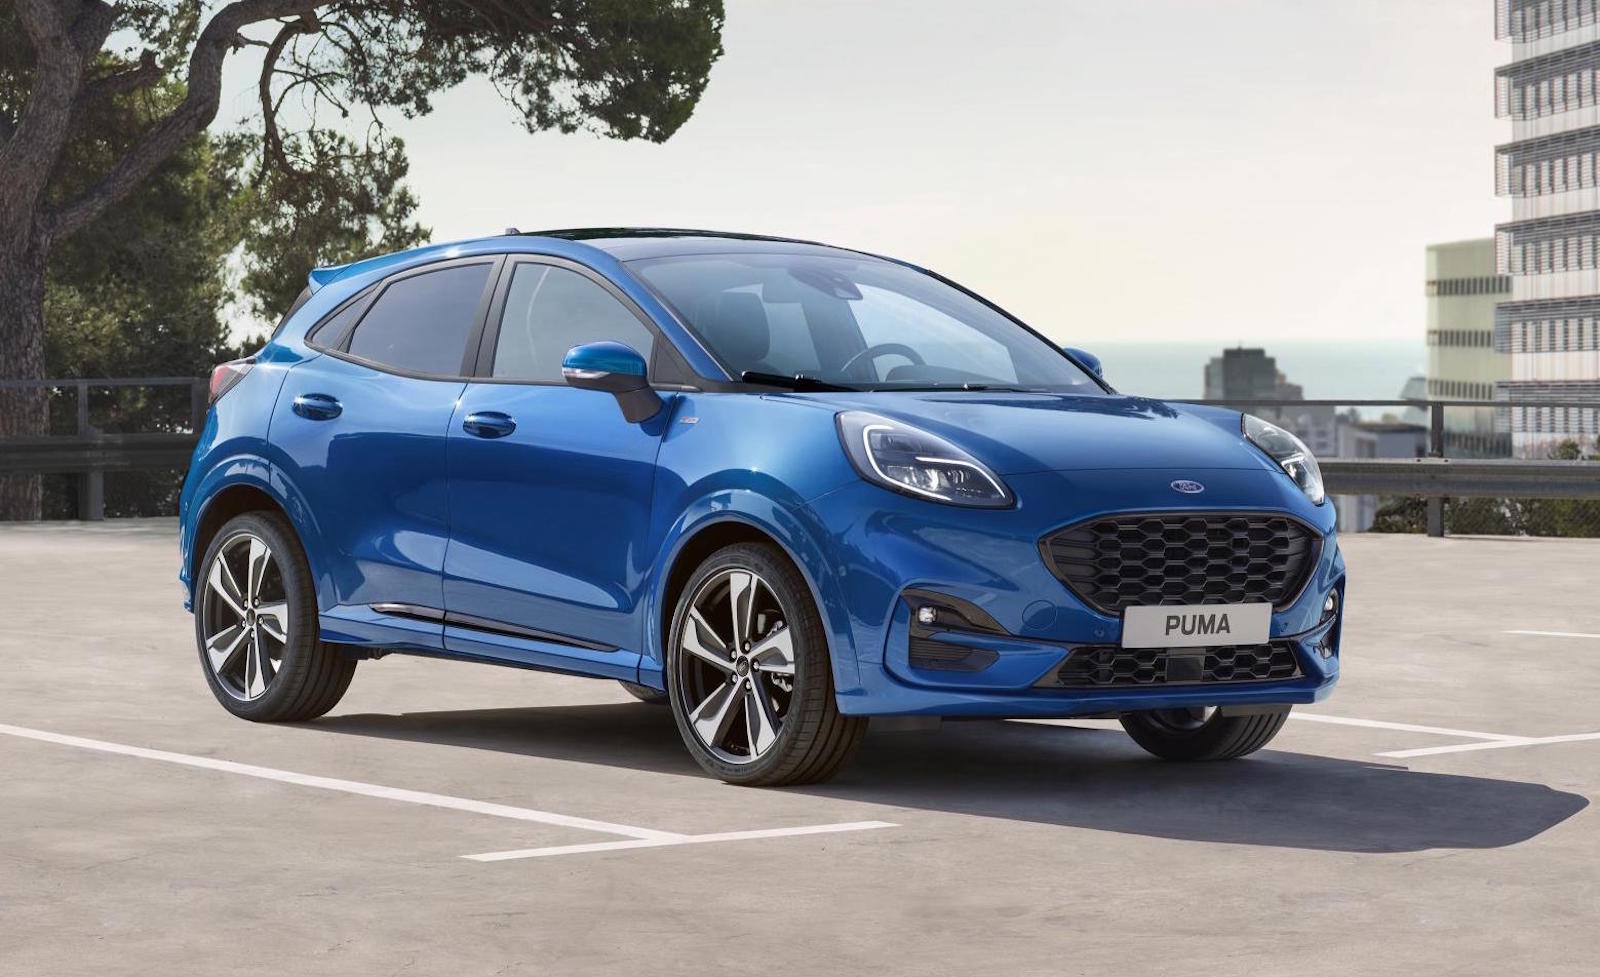 2020 Ford Puma on sale in Australia from $31,990 drive-away